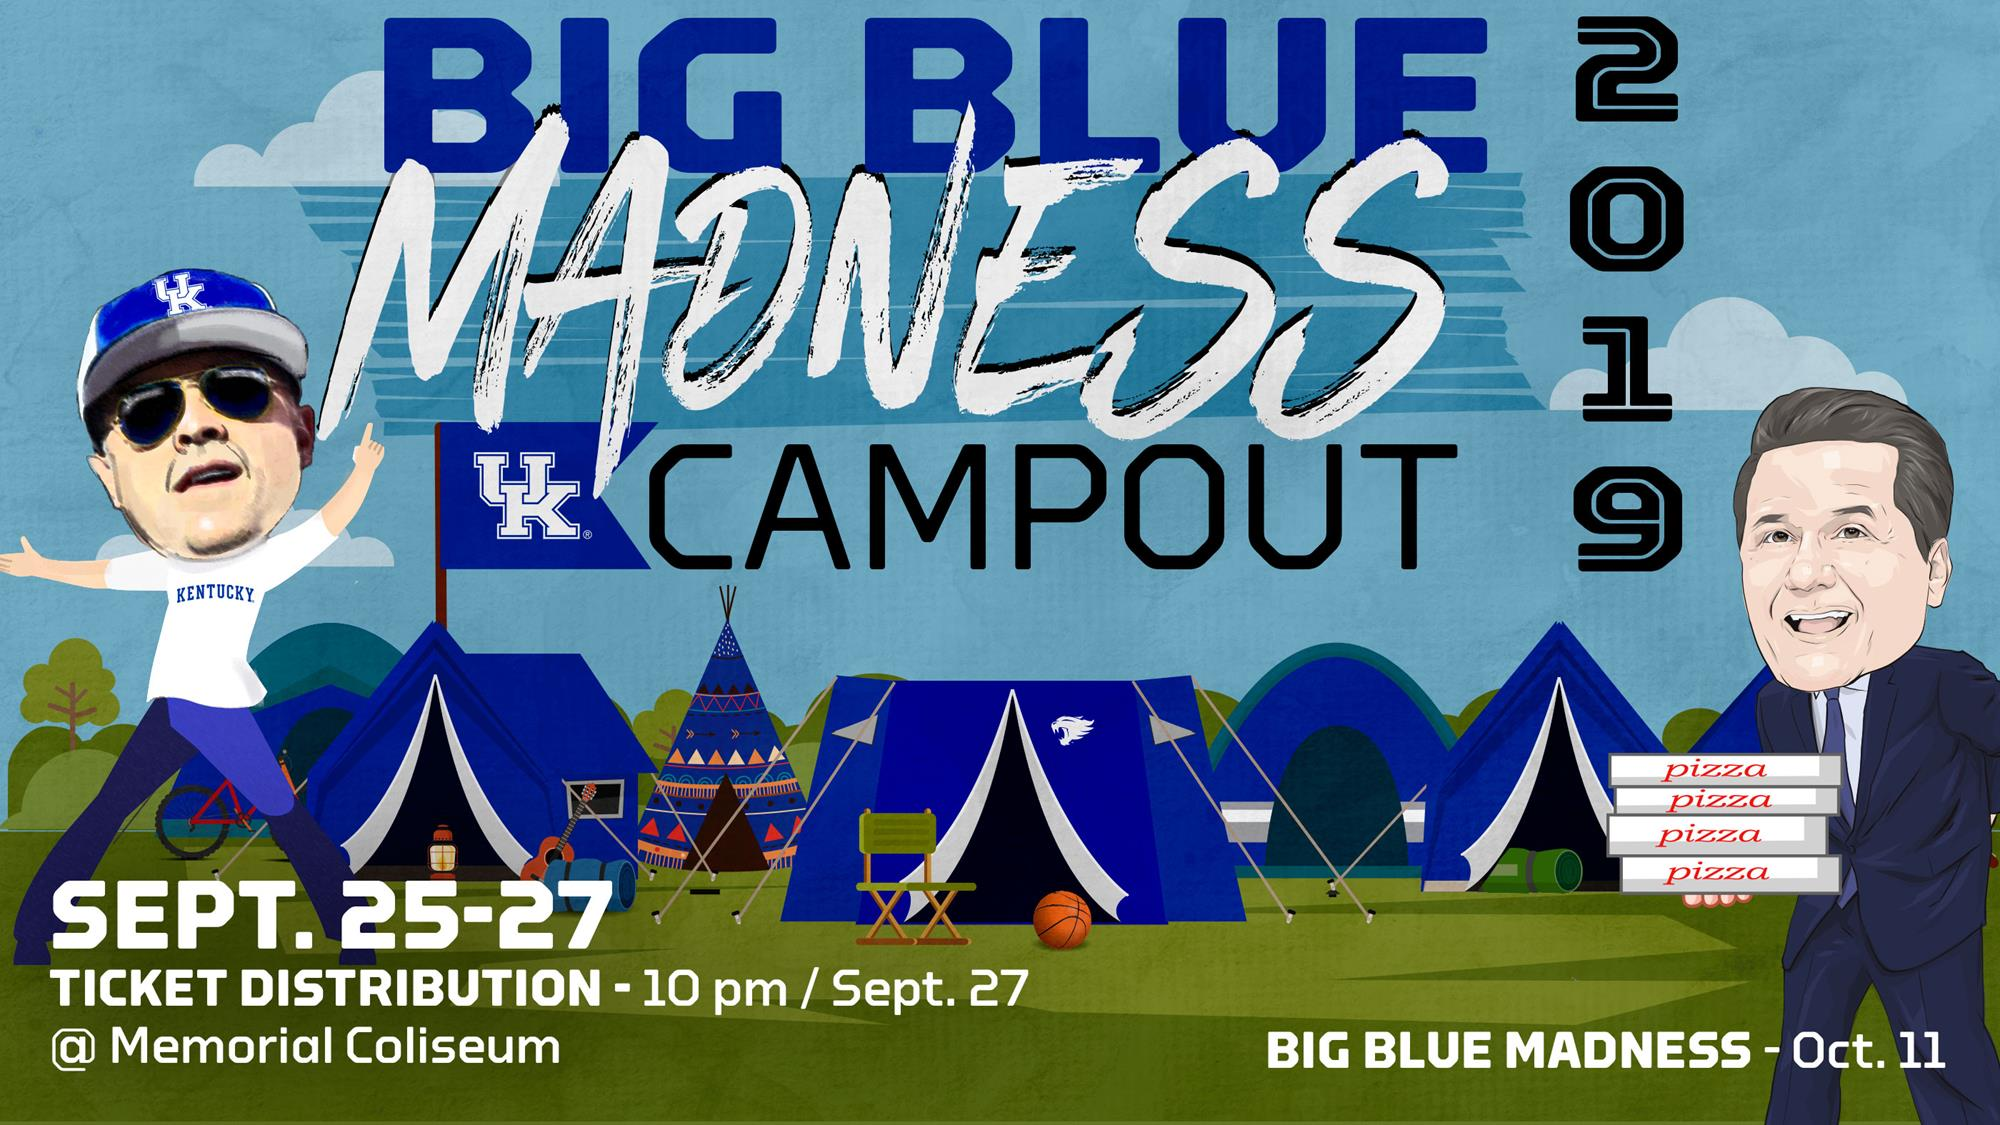 Big Blue Madness Tickets to be Distributed Sept. 27